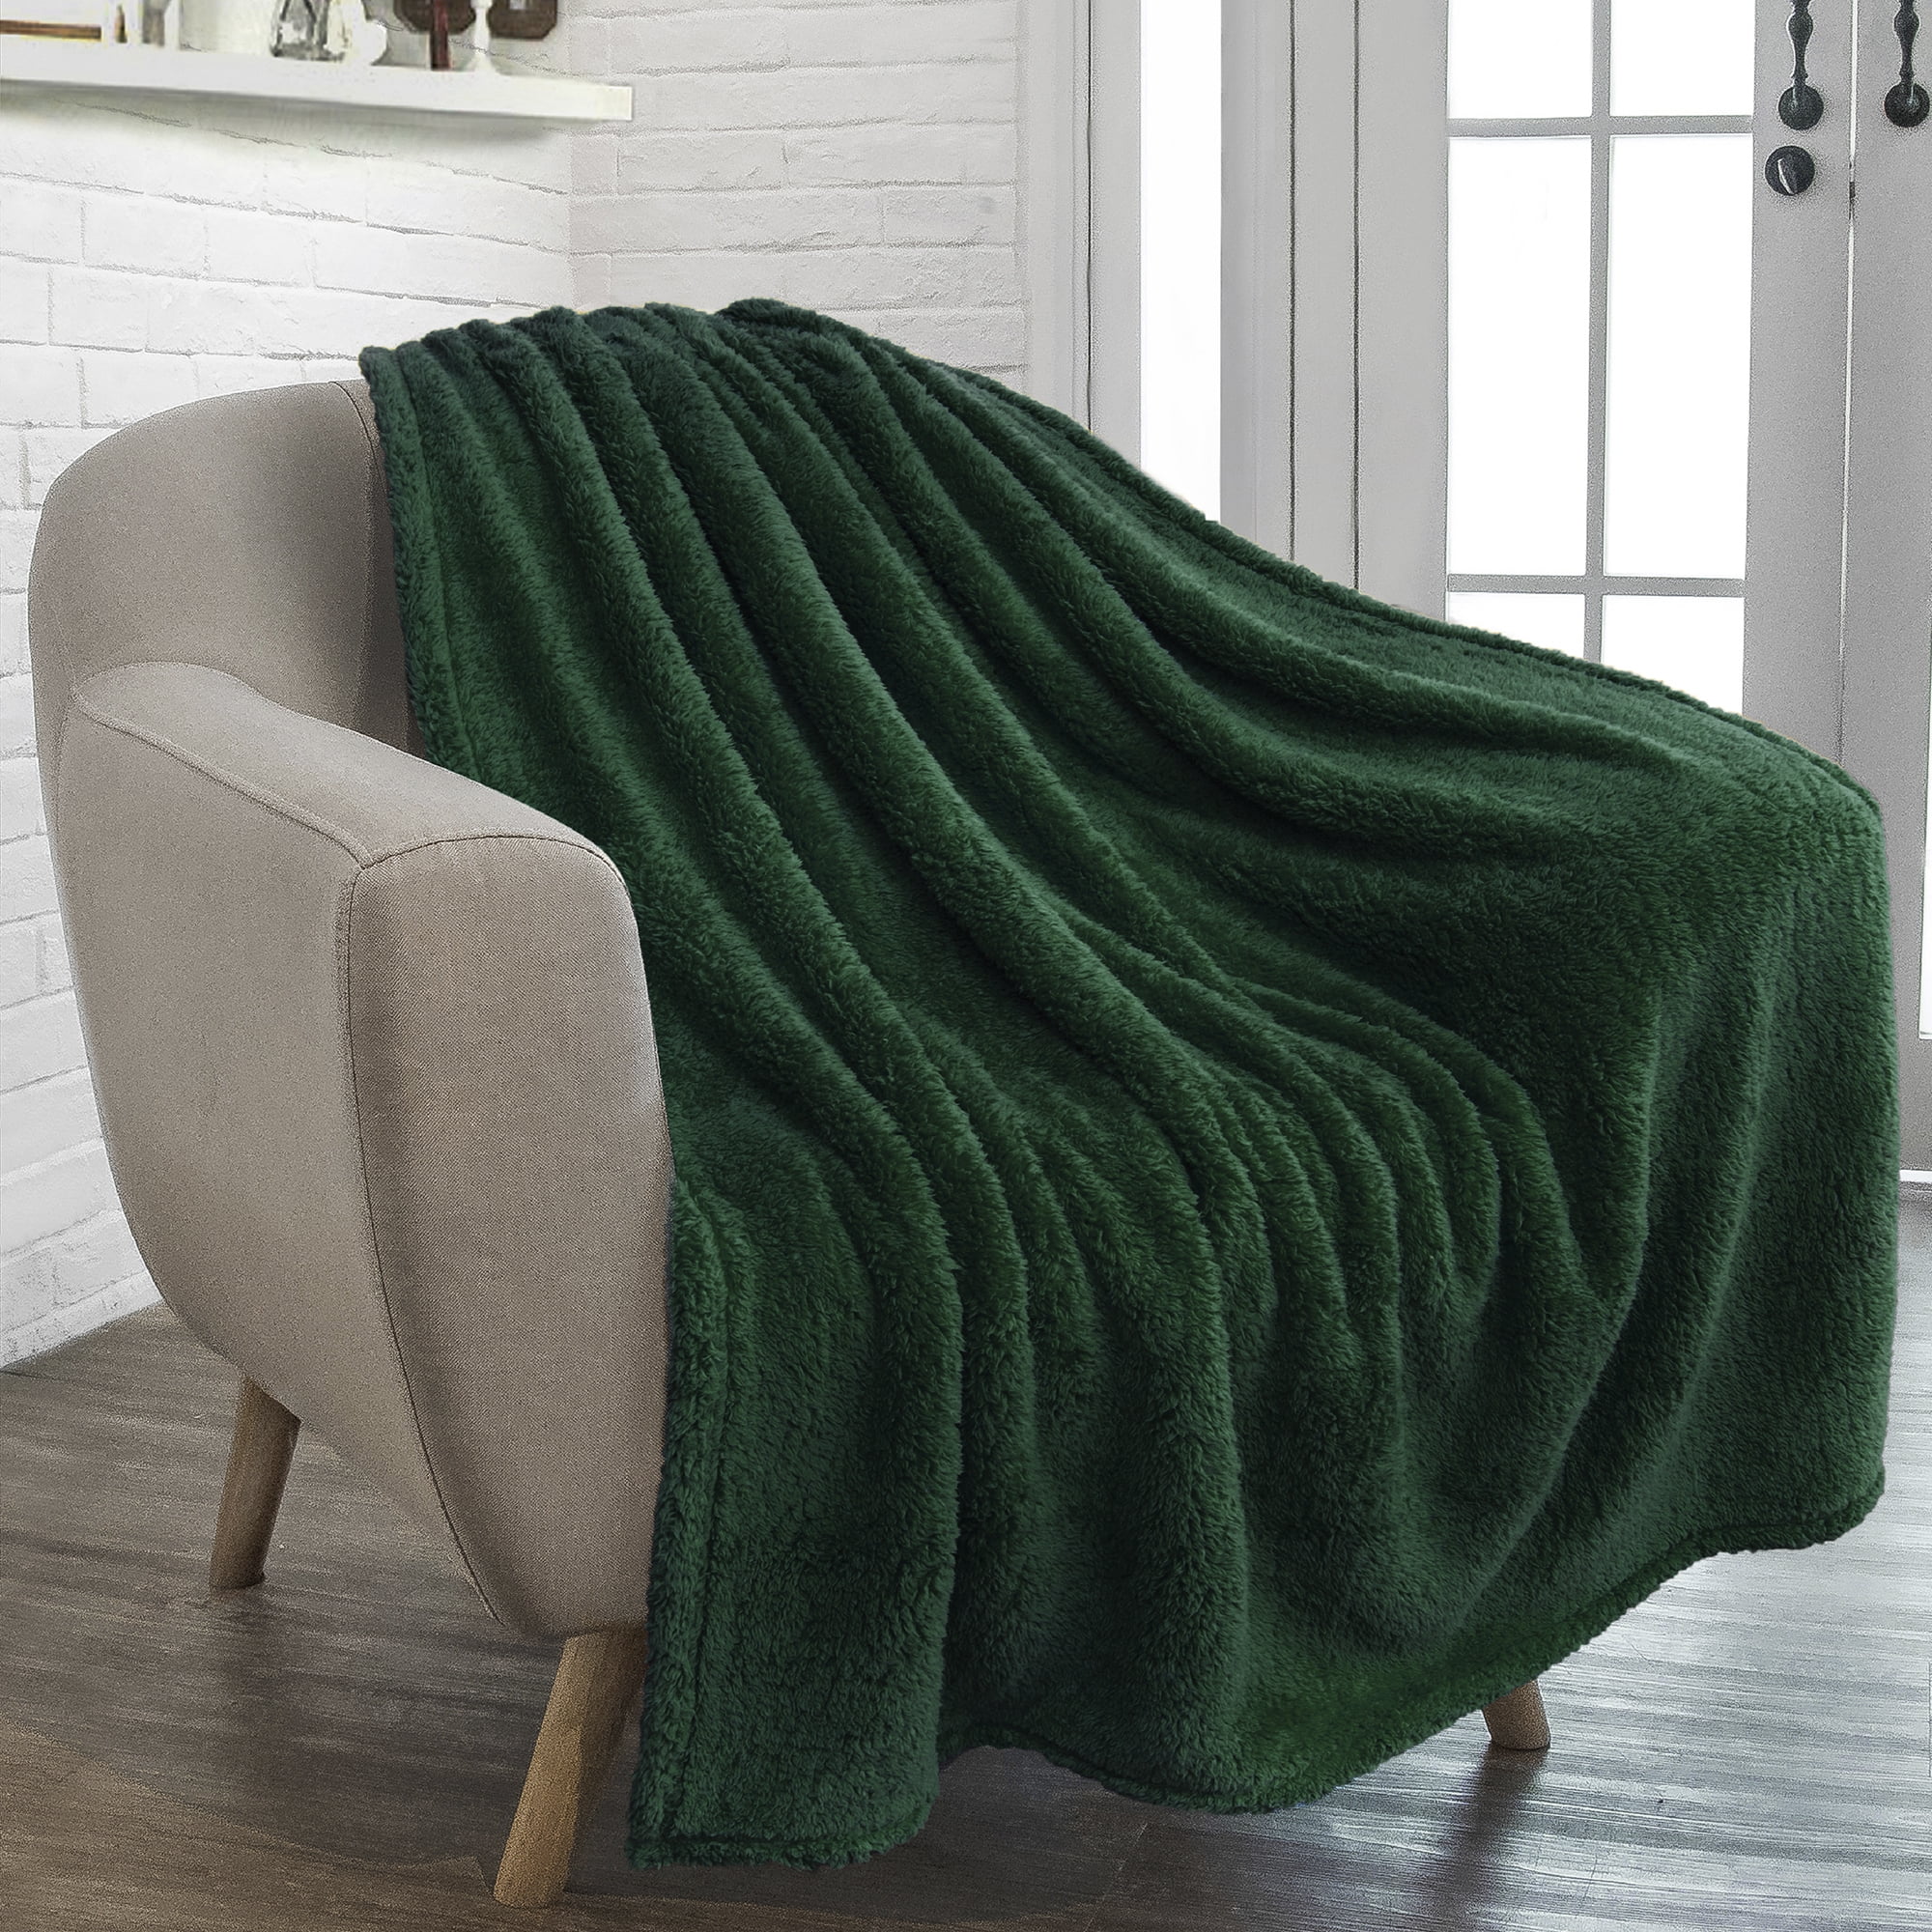 Green Illustration Super Soft Throw Blankets Forest Rabbit Leaves Luxury Comfort Fleece Bed Cover Cozy Warm Lightweight Blanket for Sofa Couch Chair 